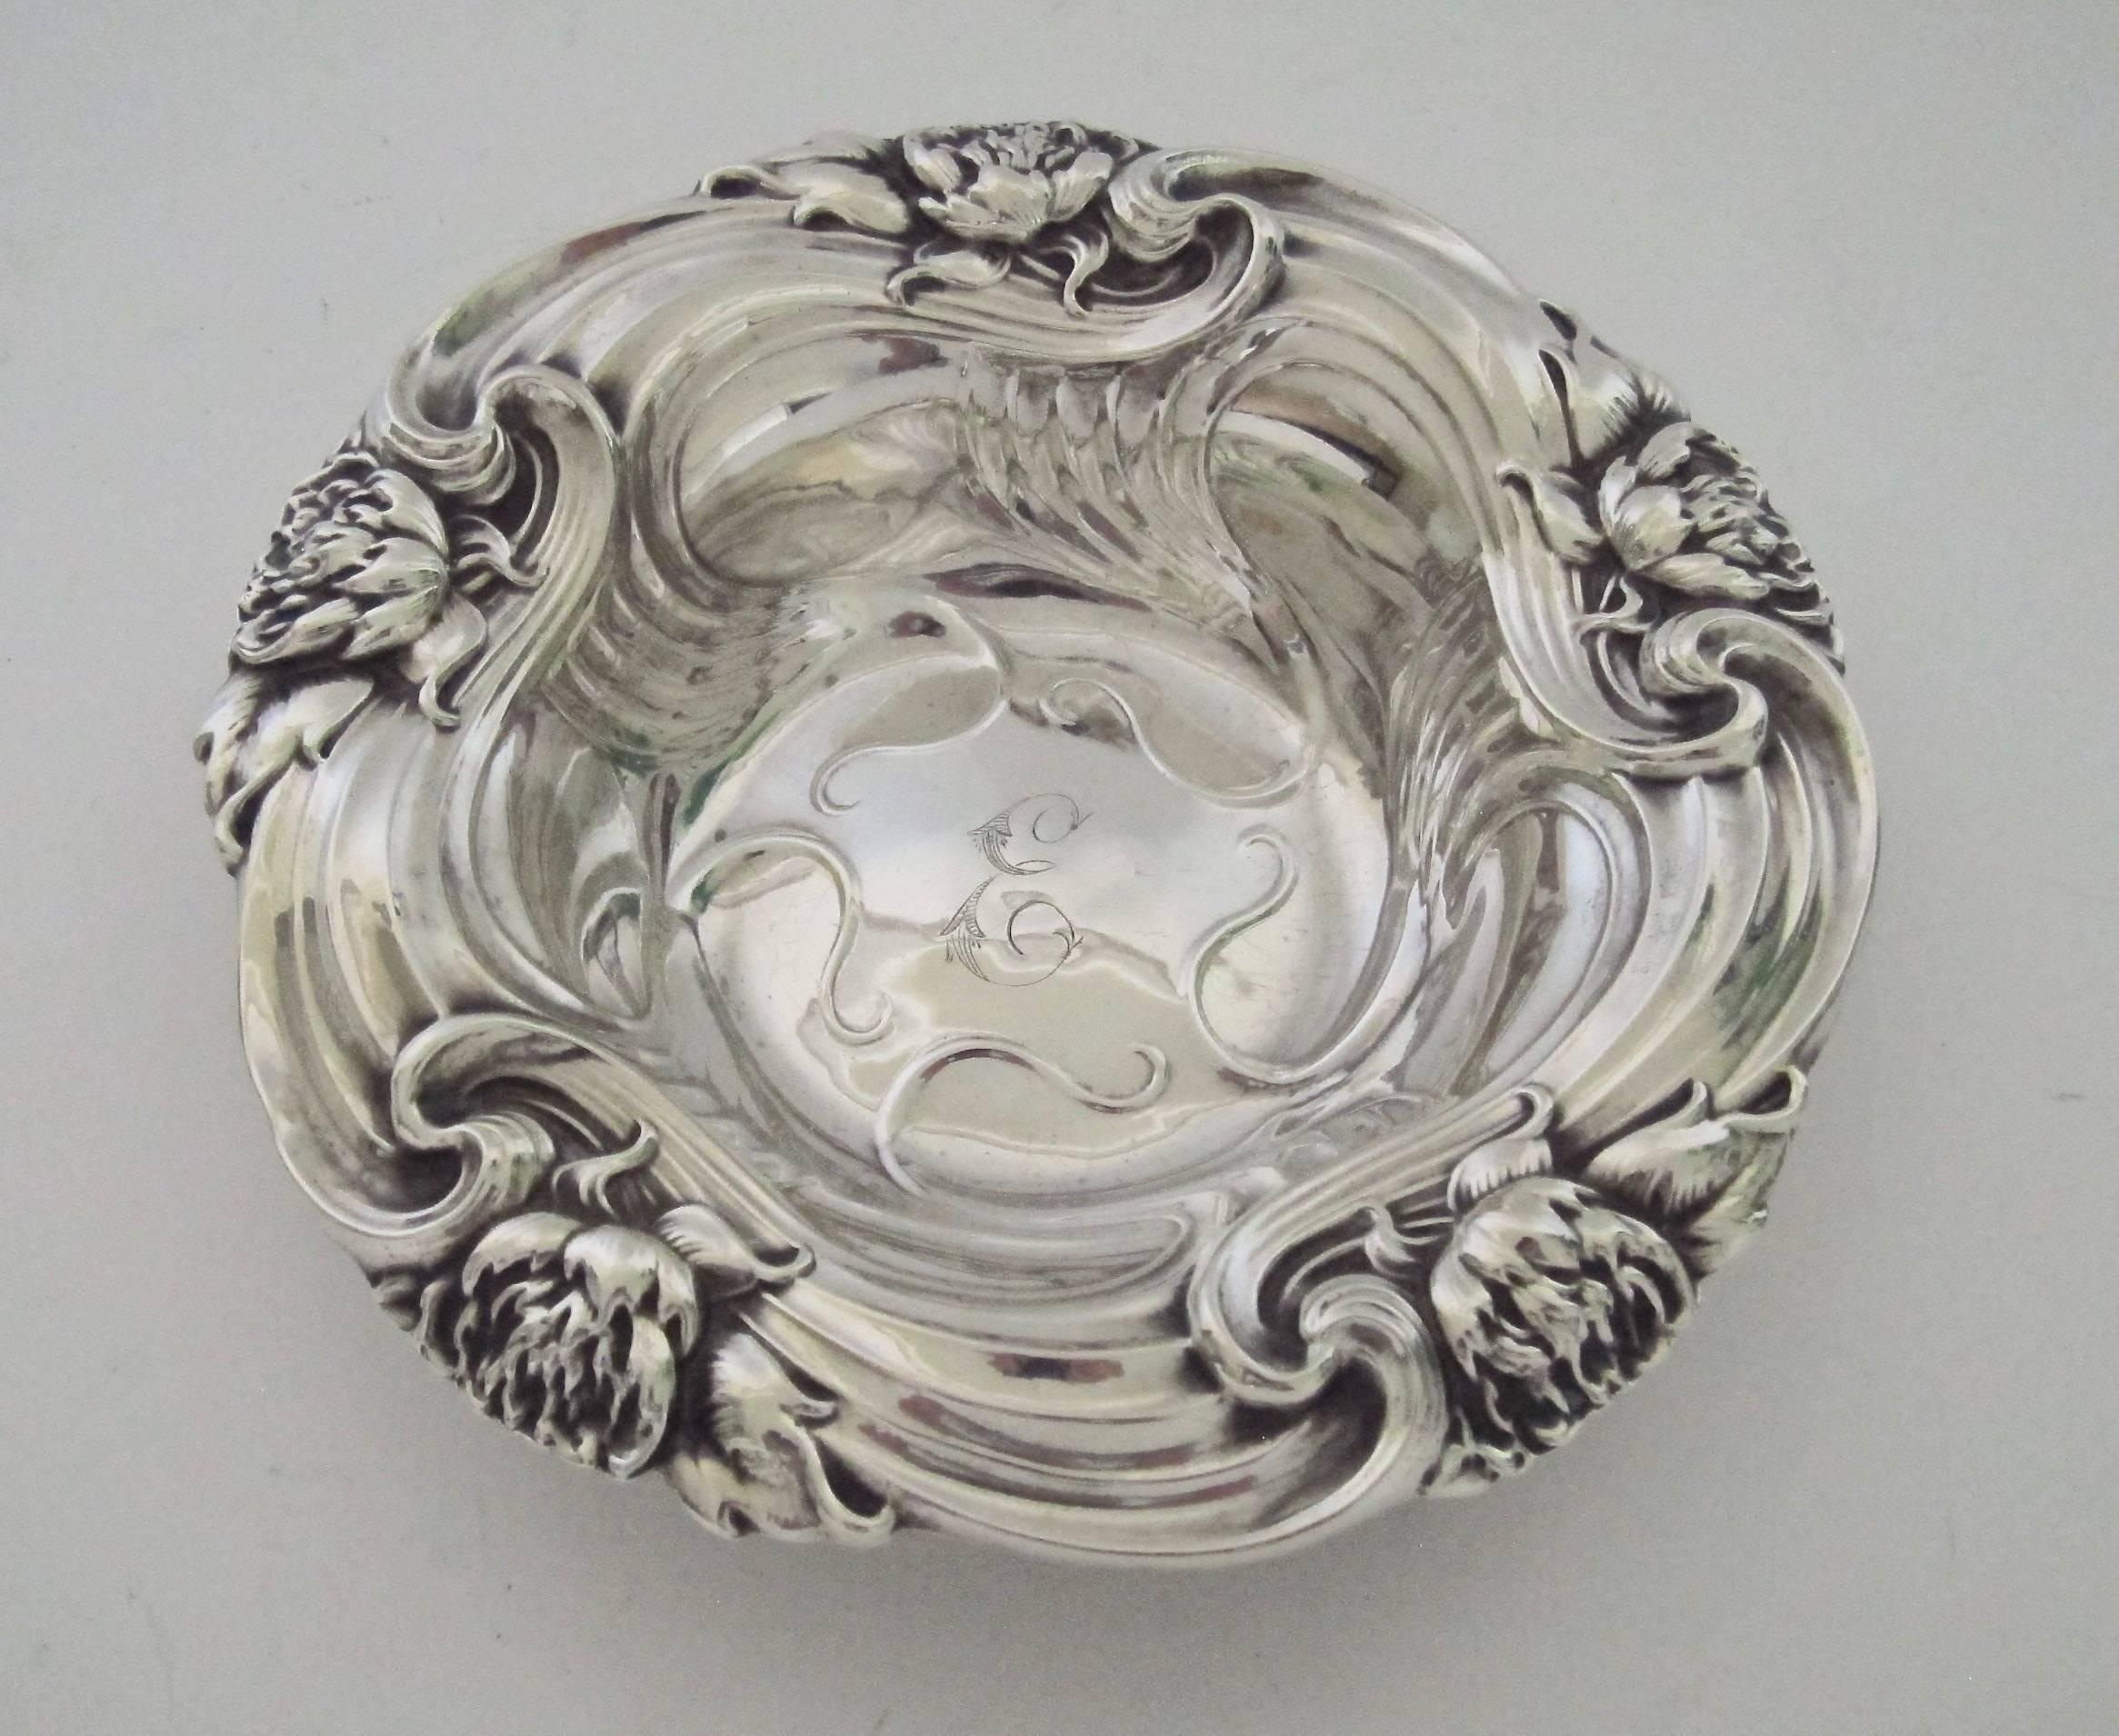 An antique sterling silver bon bon dish manufactured by the successful New York silversmiths at Whiting Manufacturing Company. The bowl is ideal for serving candy or nuts and is perfectly sized for use as a wine bottle coaster. 

Bold Art Nouveau